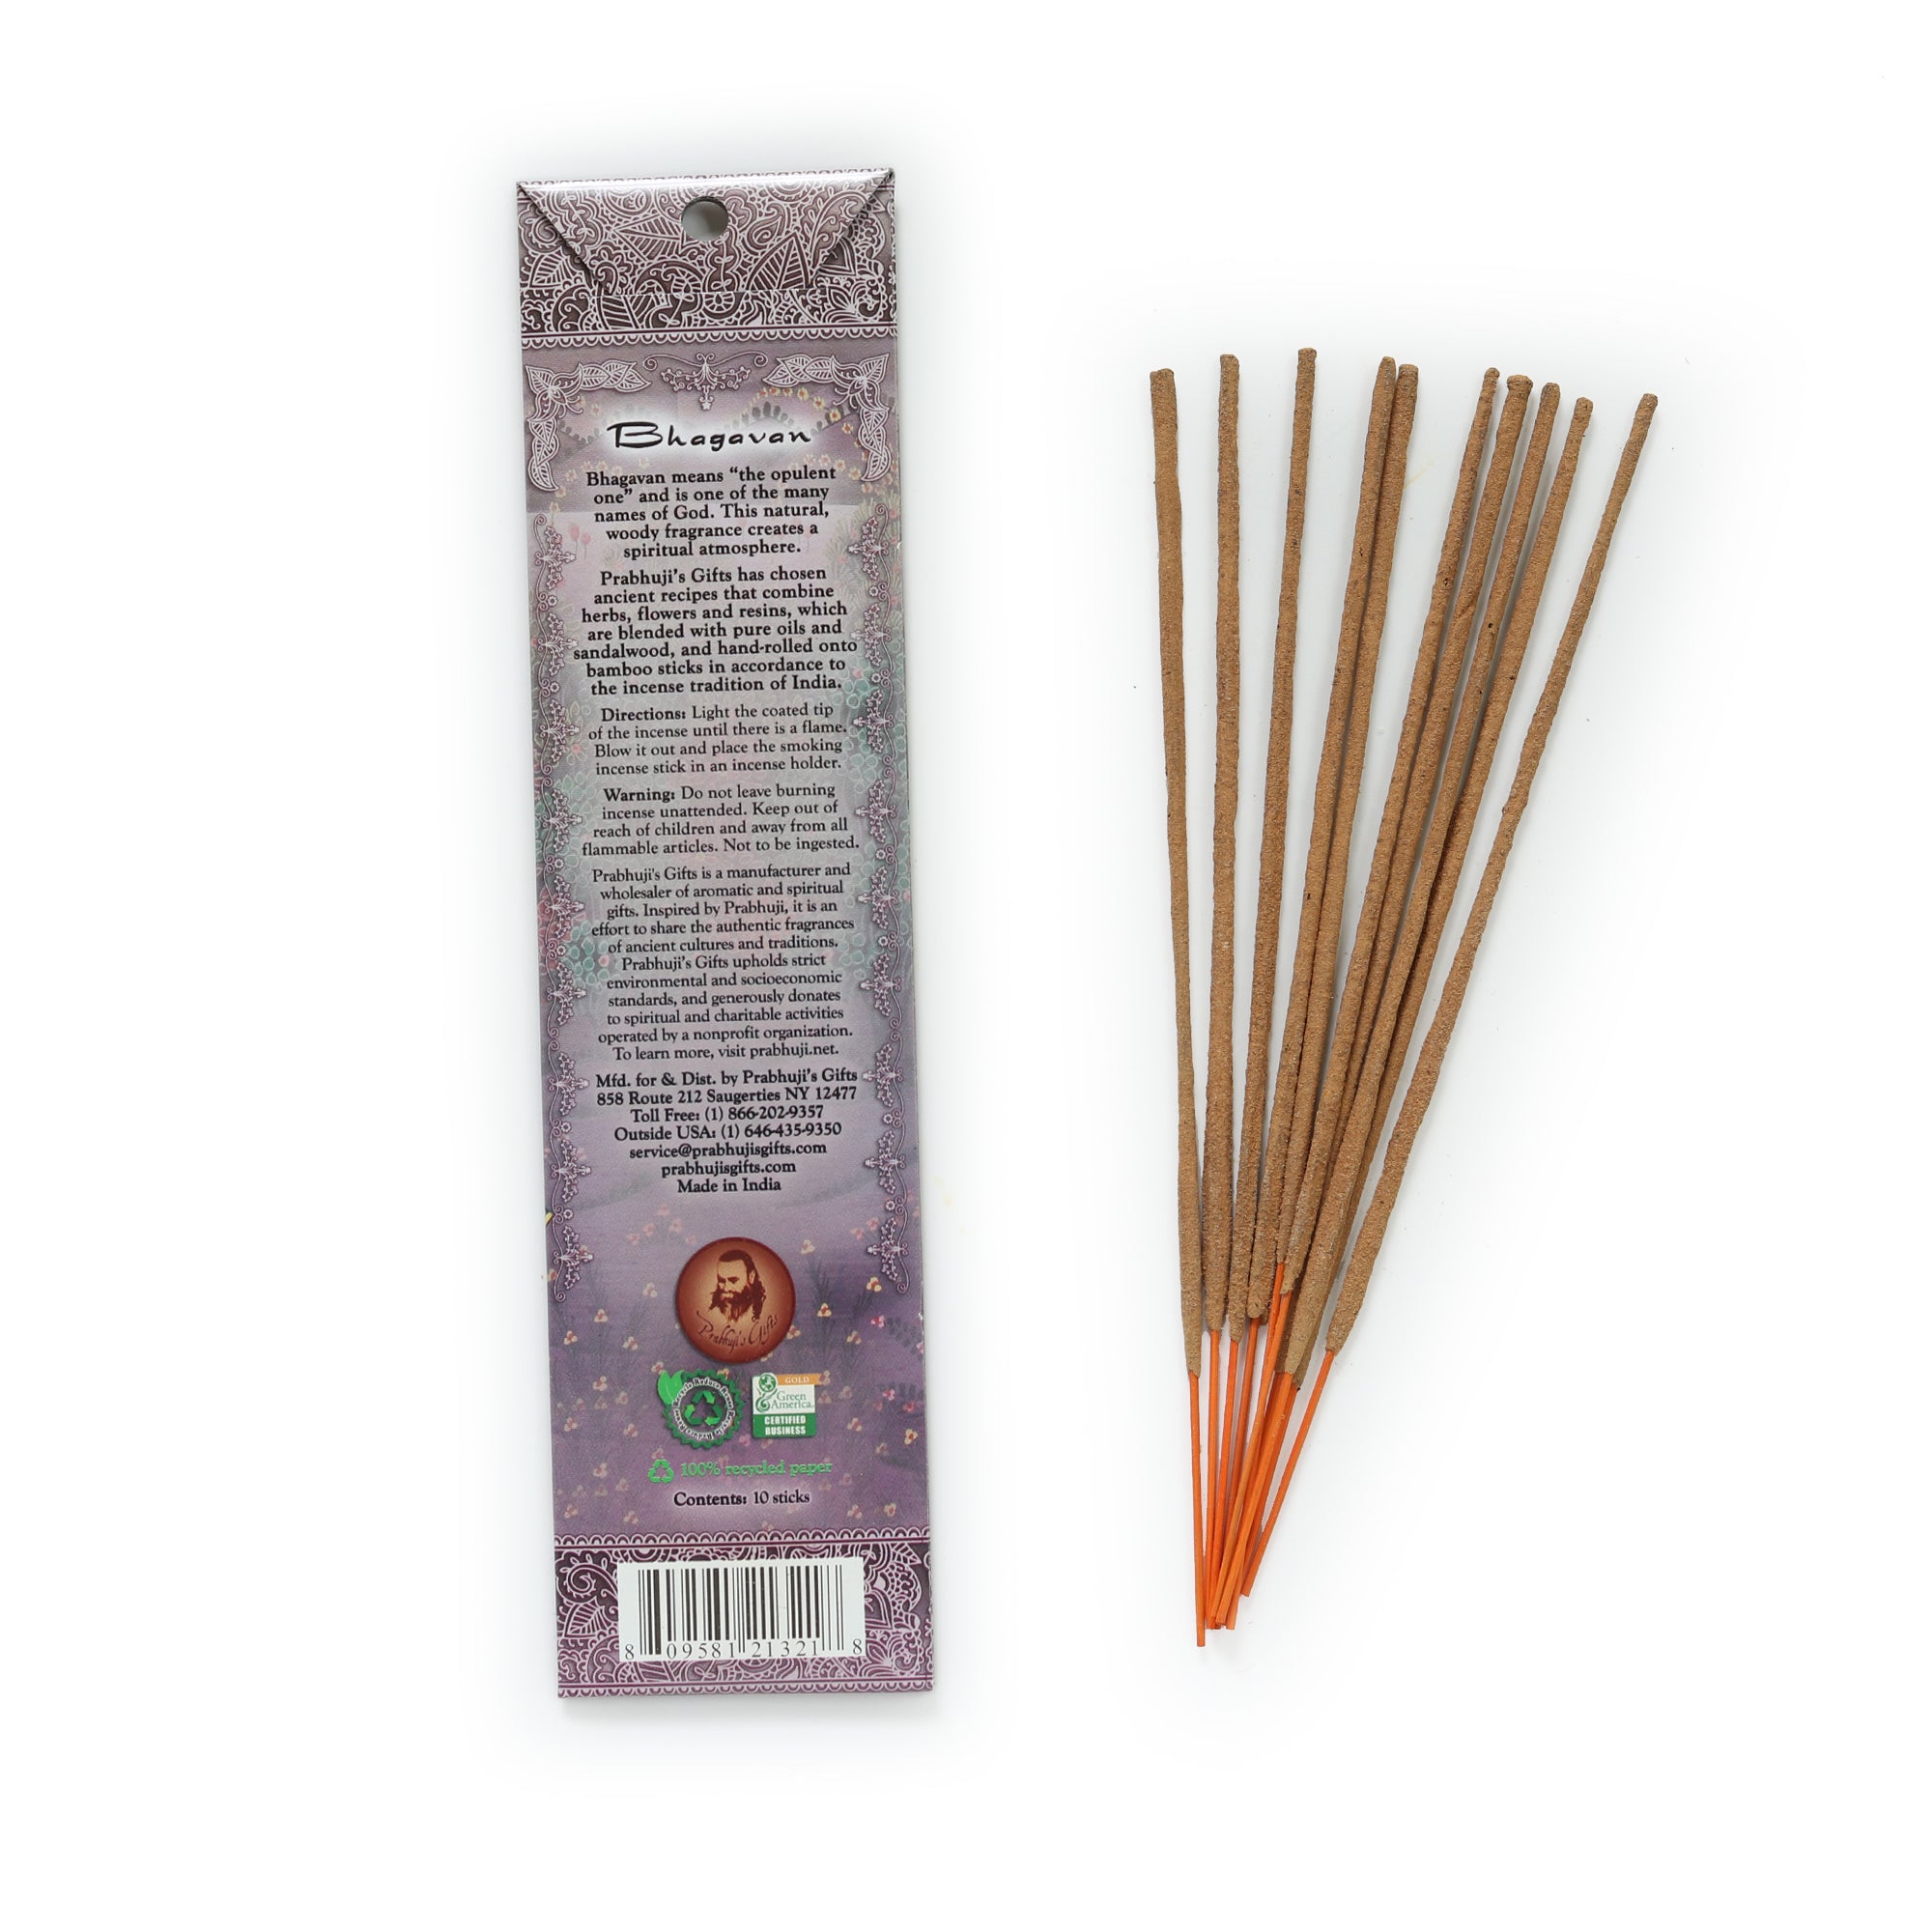 Bhagavan Incense Sticks - Patchouli and Vetiver - Wholesale and Retail ...